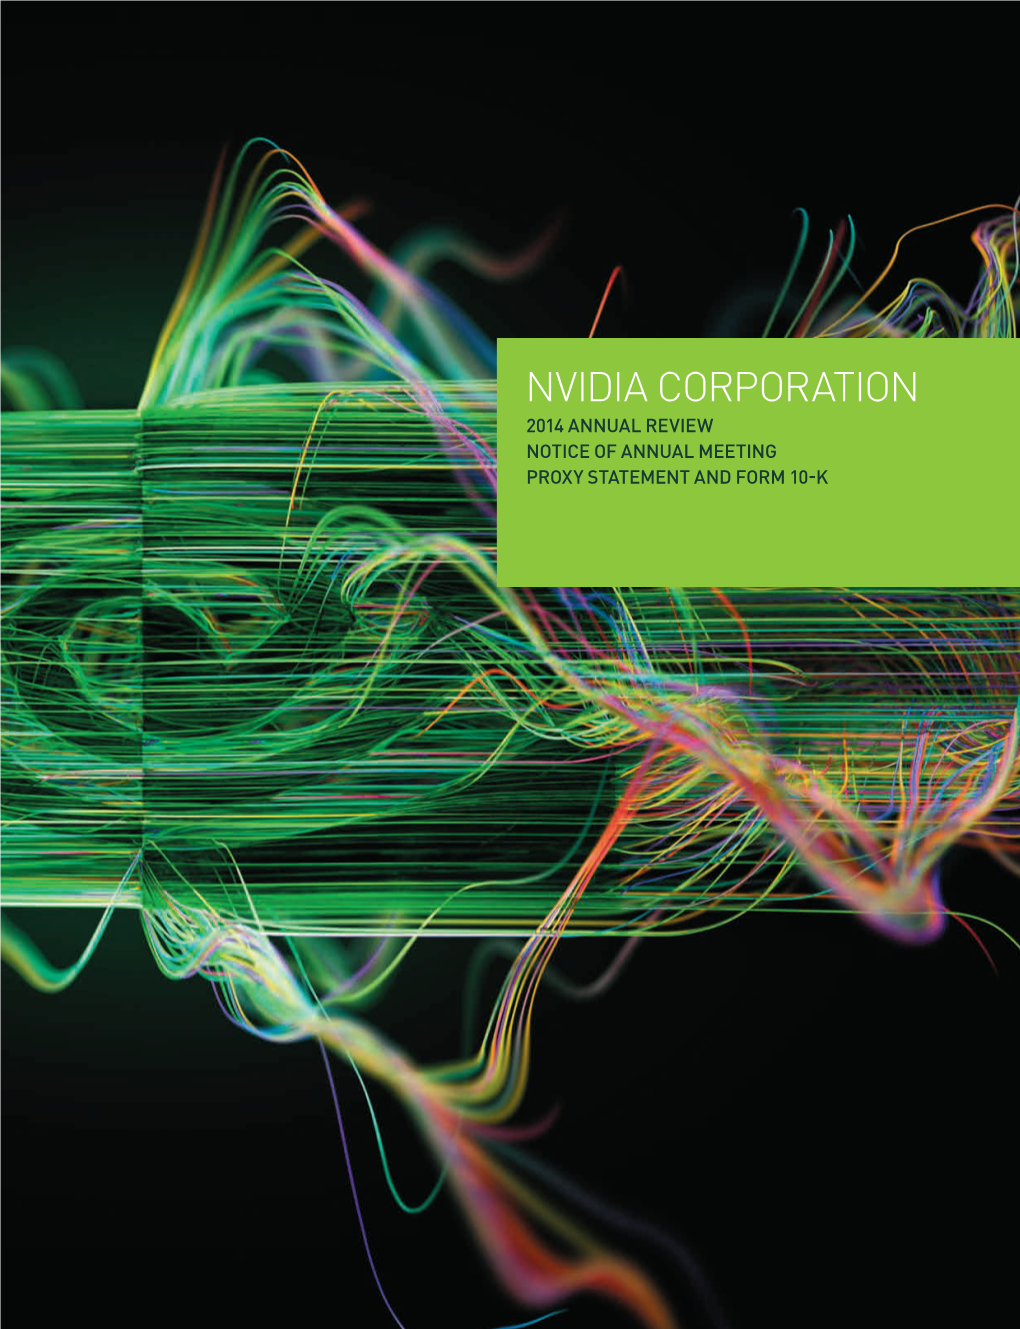 2014 Annual Review Notice of Annual Meeting Proxy Statement and Form 10-K Nvidia Corporation Nvidia